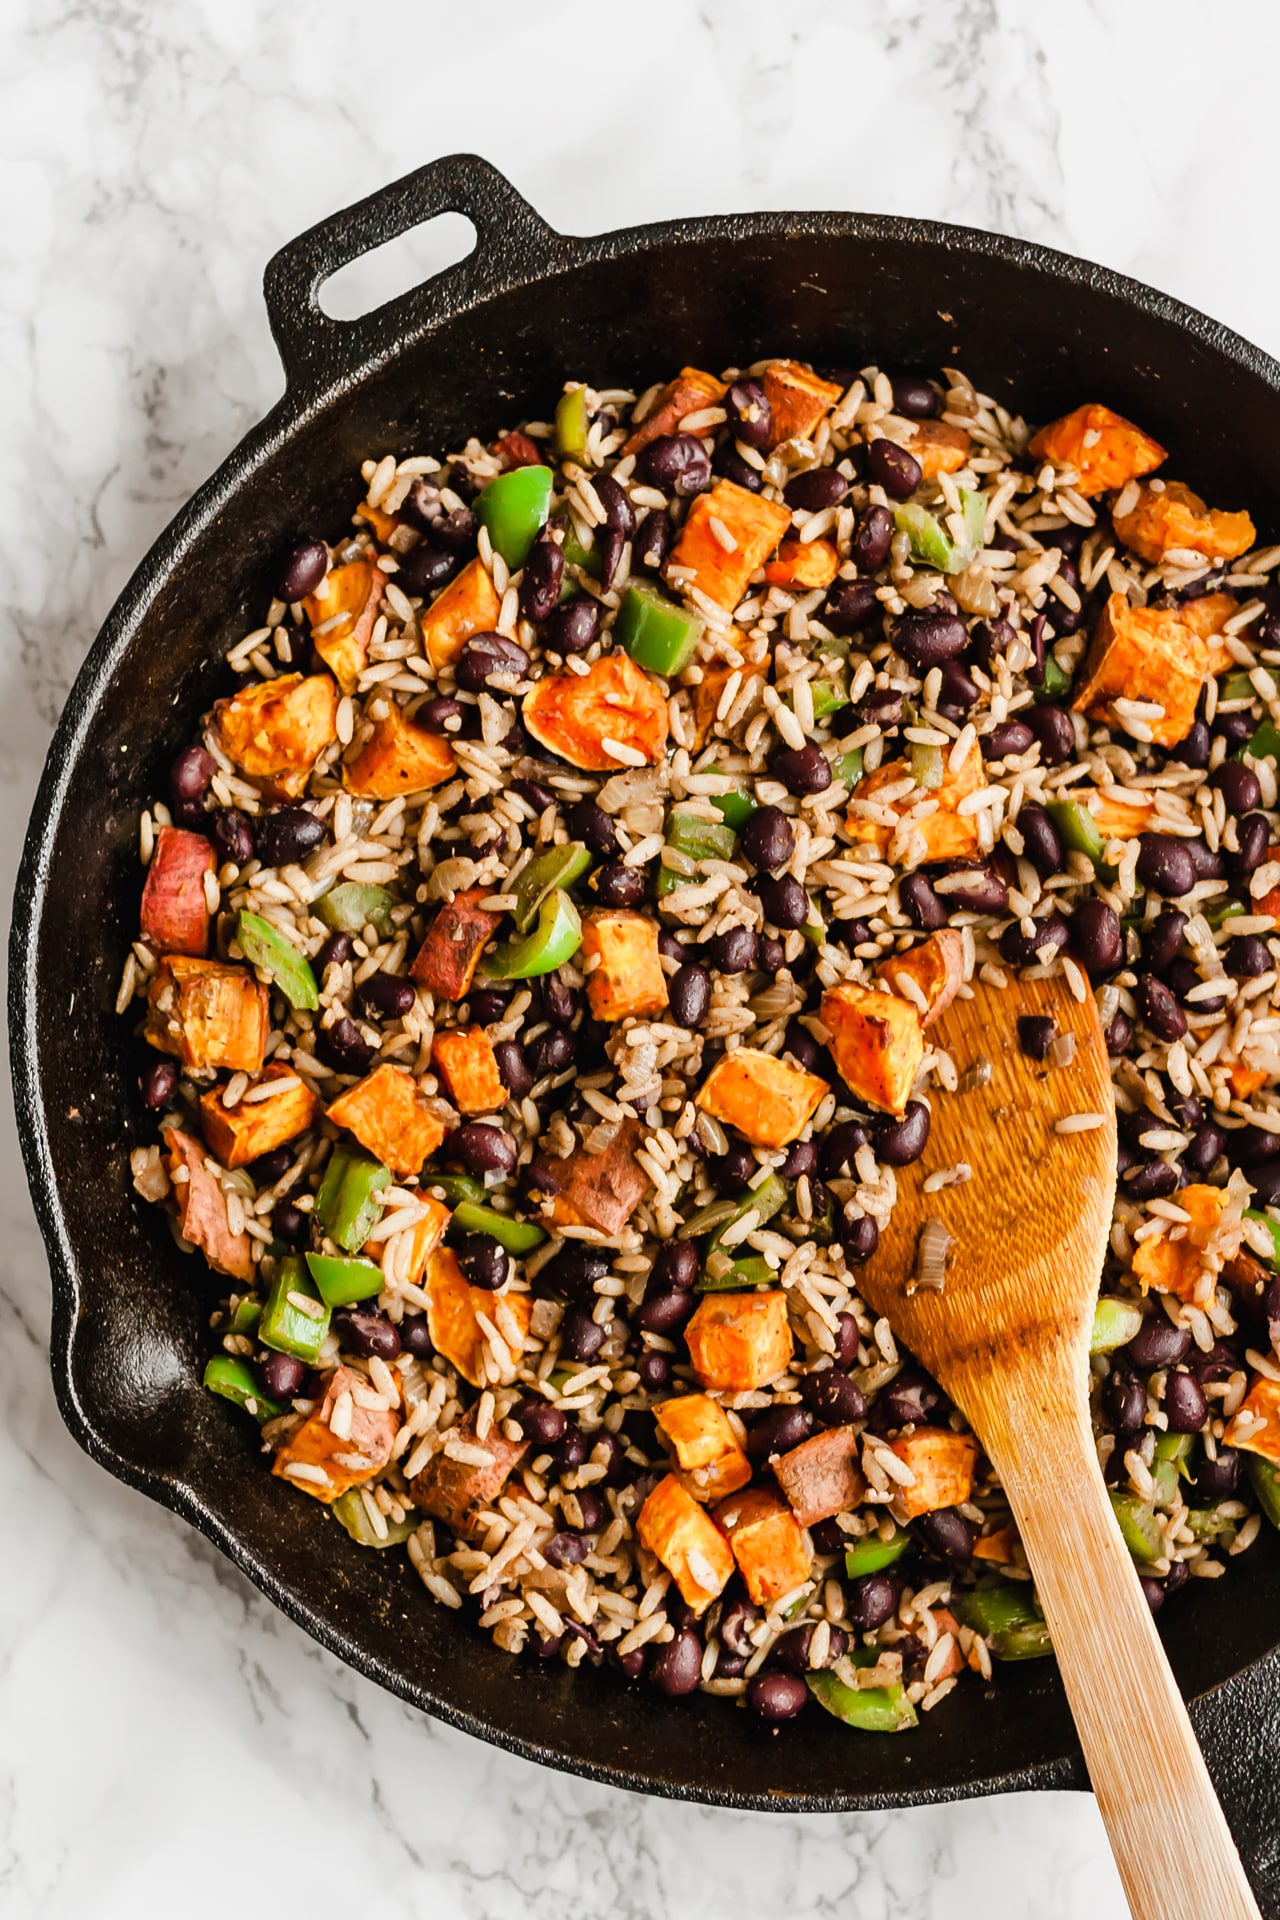 Stirring together cubed sweet potato with black beans, rice and veggies in a pan.